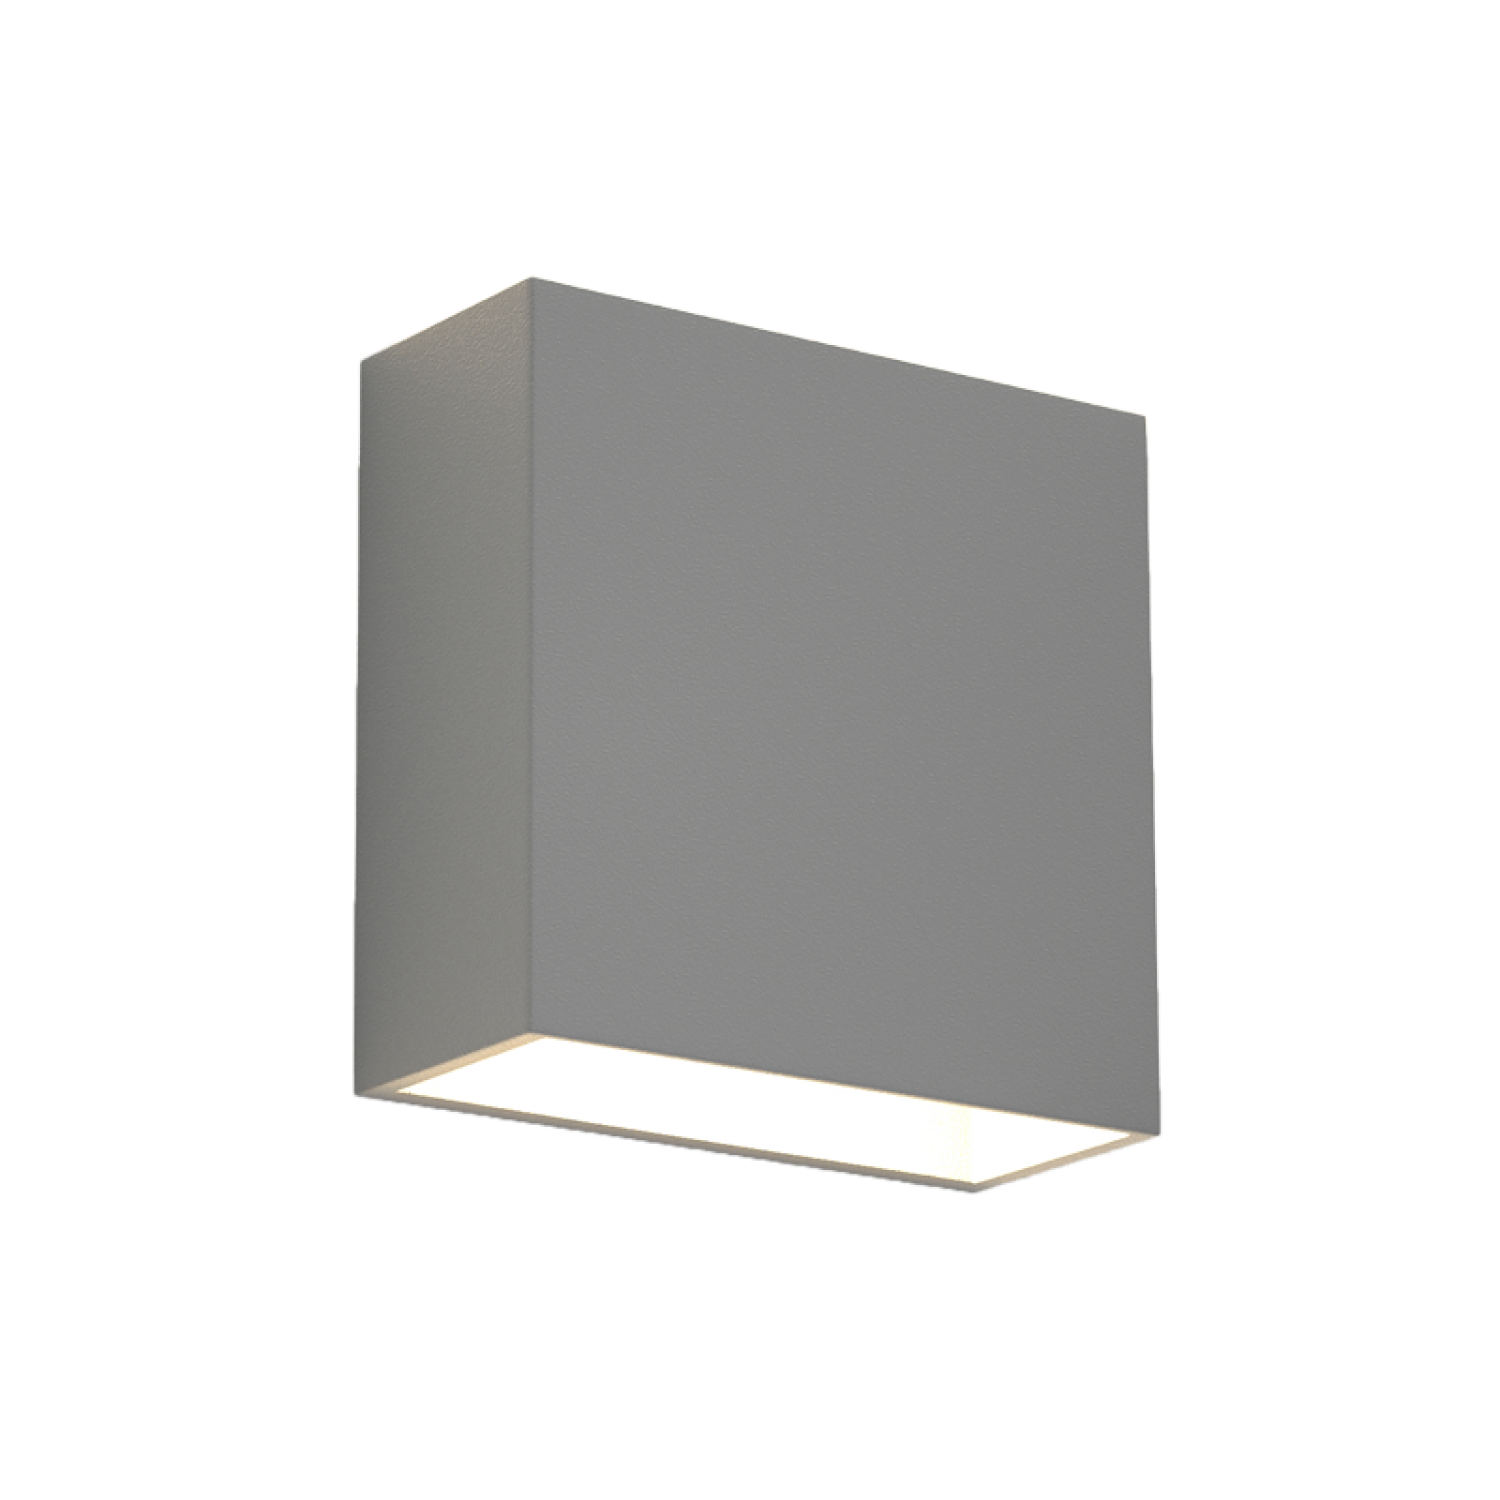 Yellowstone LED 4W Outdoor Up-Down Adjustable Wall Lamp Grey D:12cmx12cm (80200931)